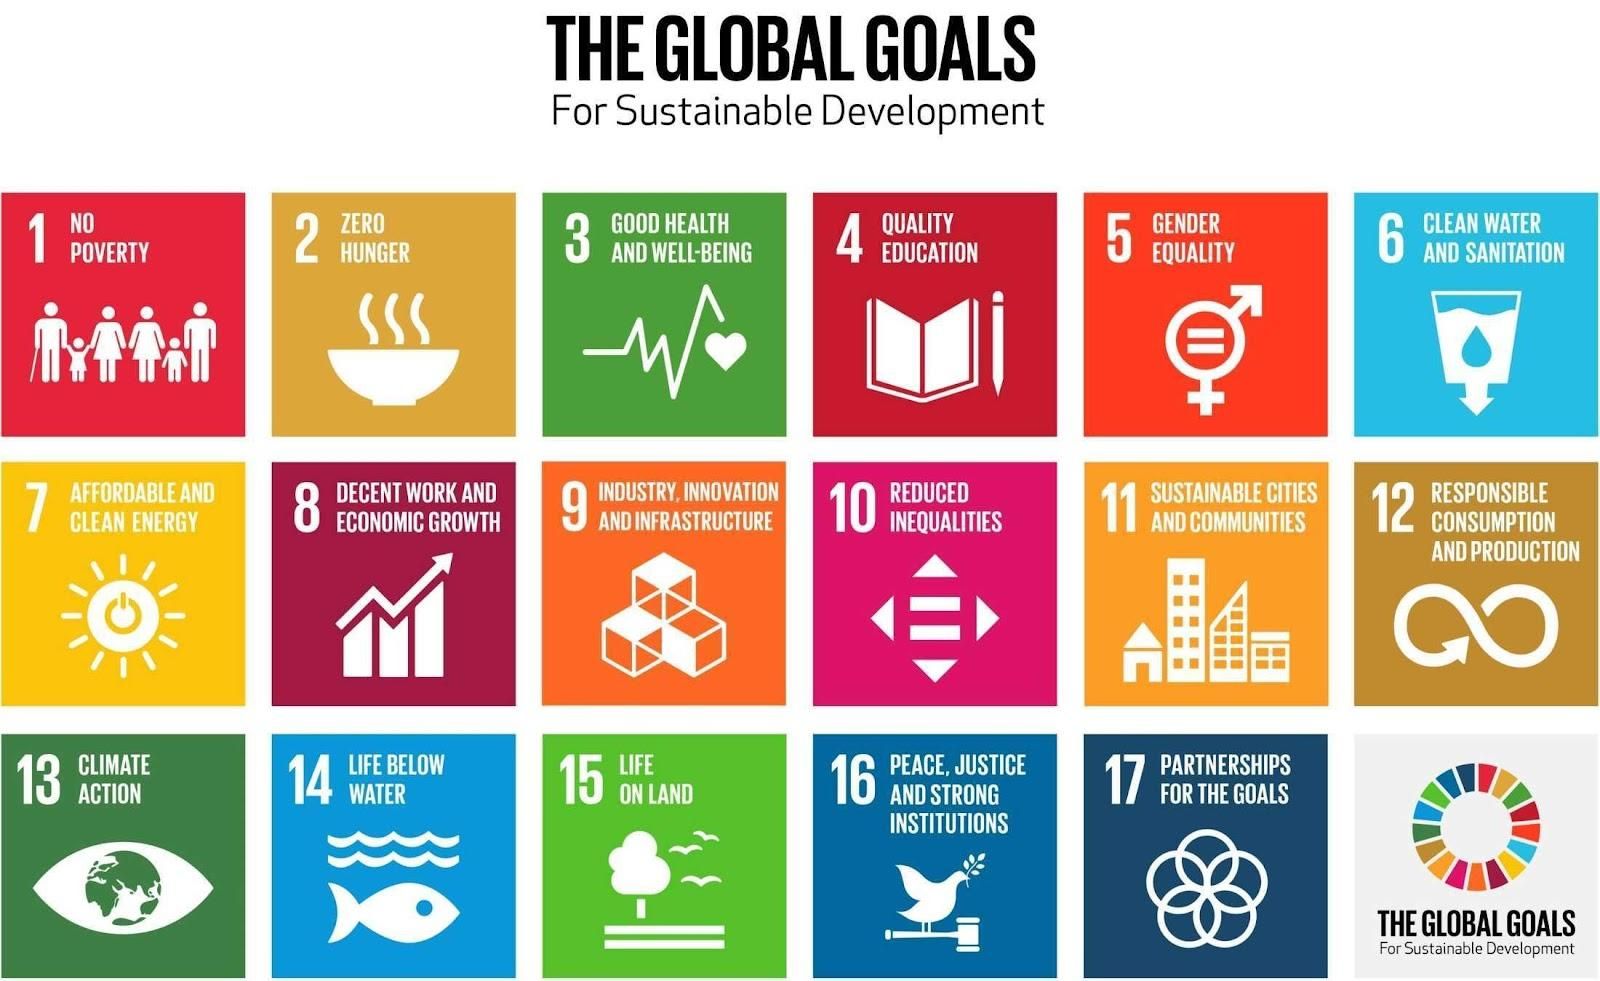 Image depicting The 17 Global Goals for sustainable development